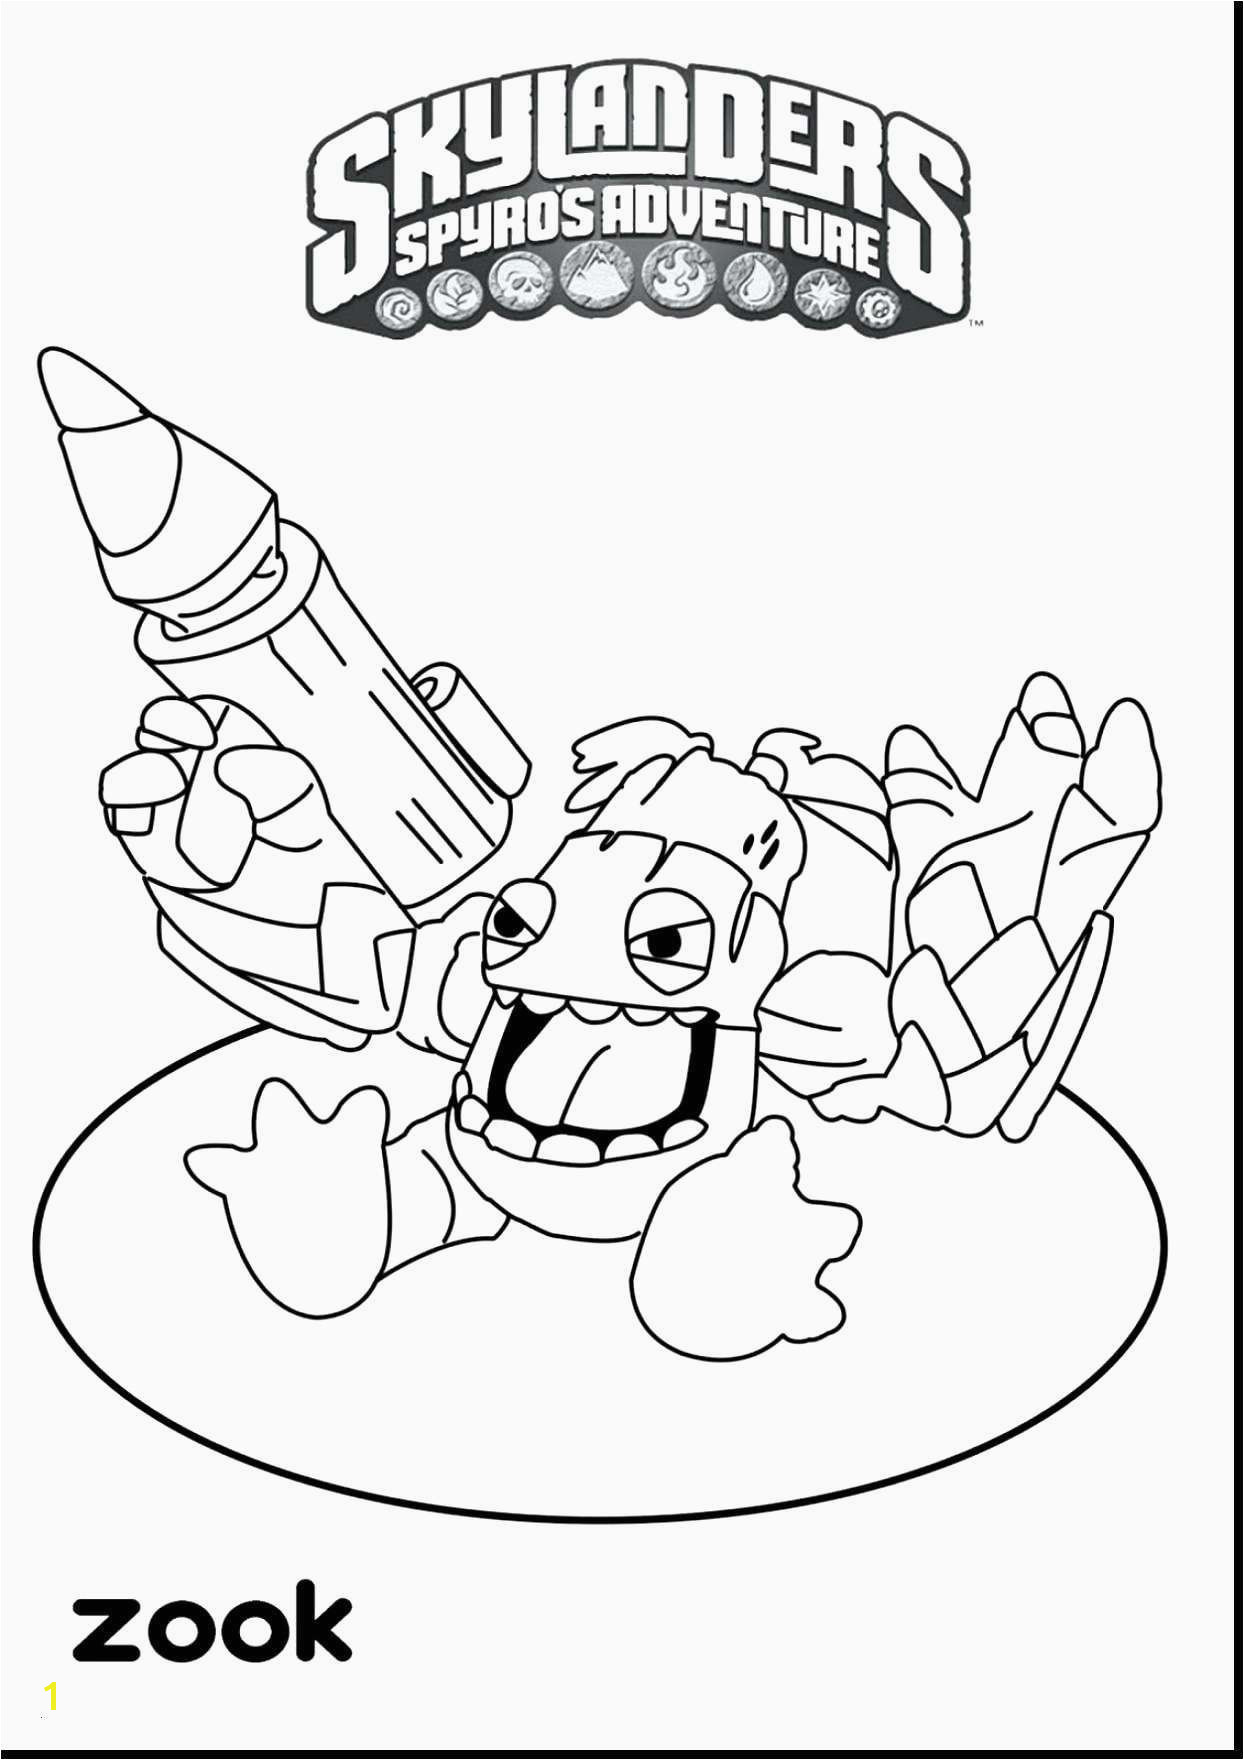 Cool Coloring Page Inspirational Witch Coloring Pages New Crayola Pages 0d Coloring Page Art Coloring Pages